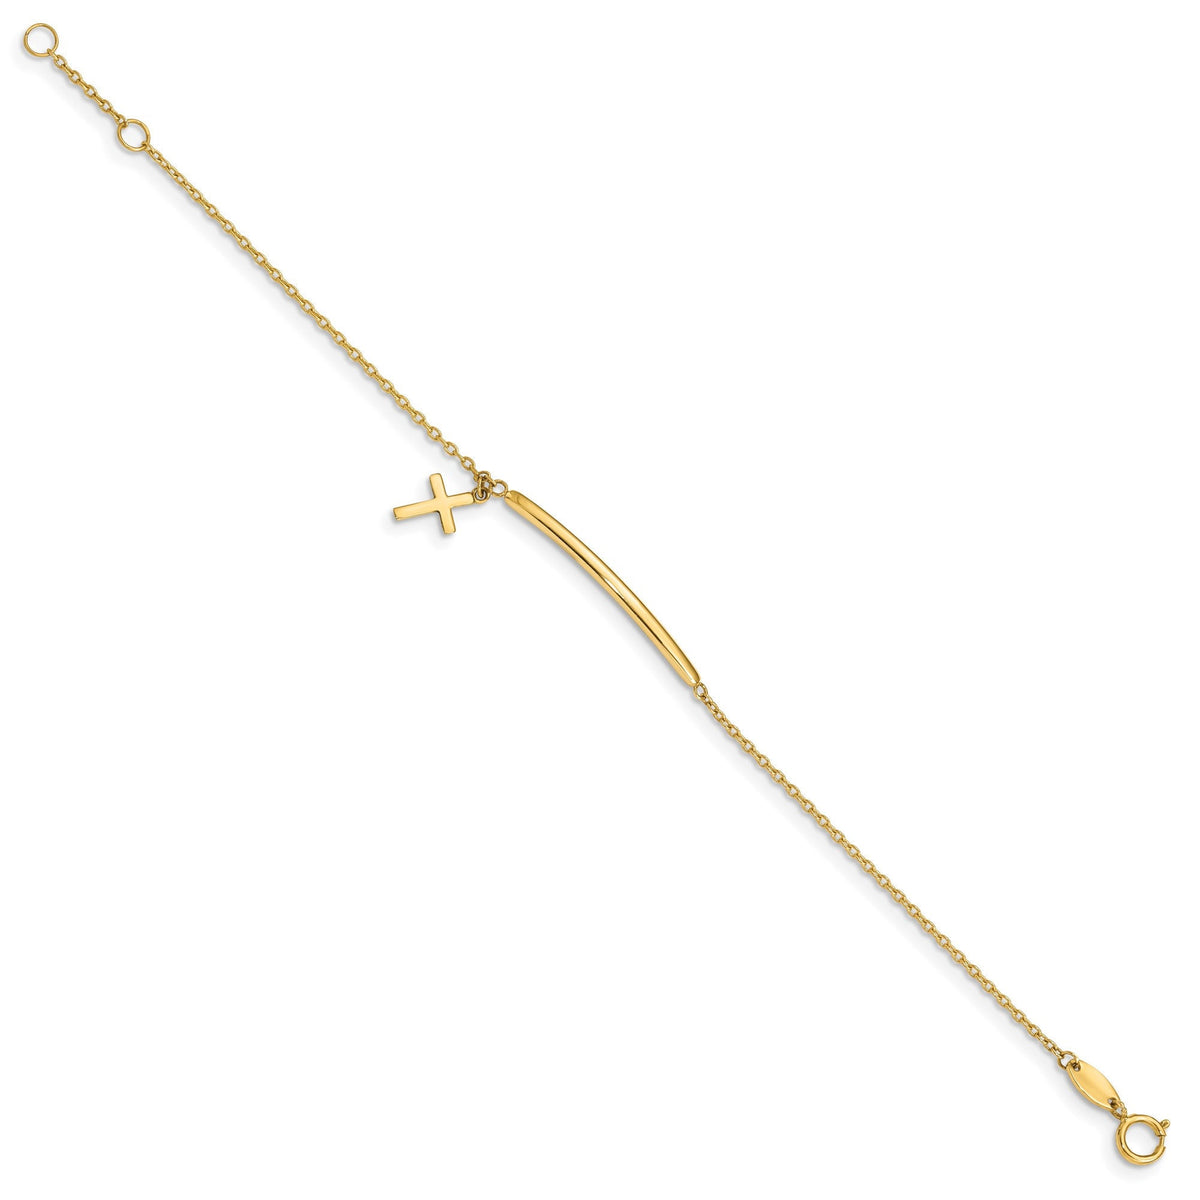 Baby to Toddler 14k Yellow Gold Personalized Cross Bracelet - 5.5 inches Baby to Toddler Size - Gift Box Included